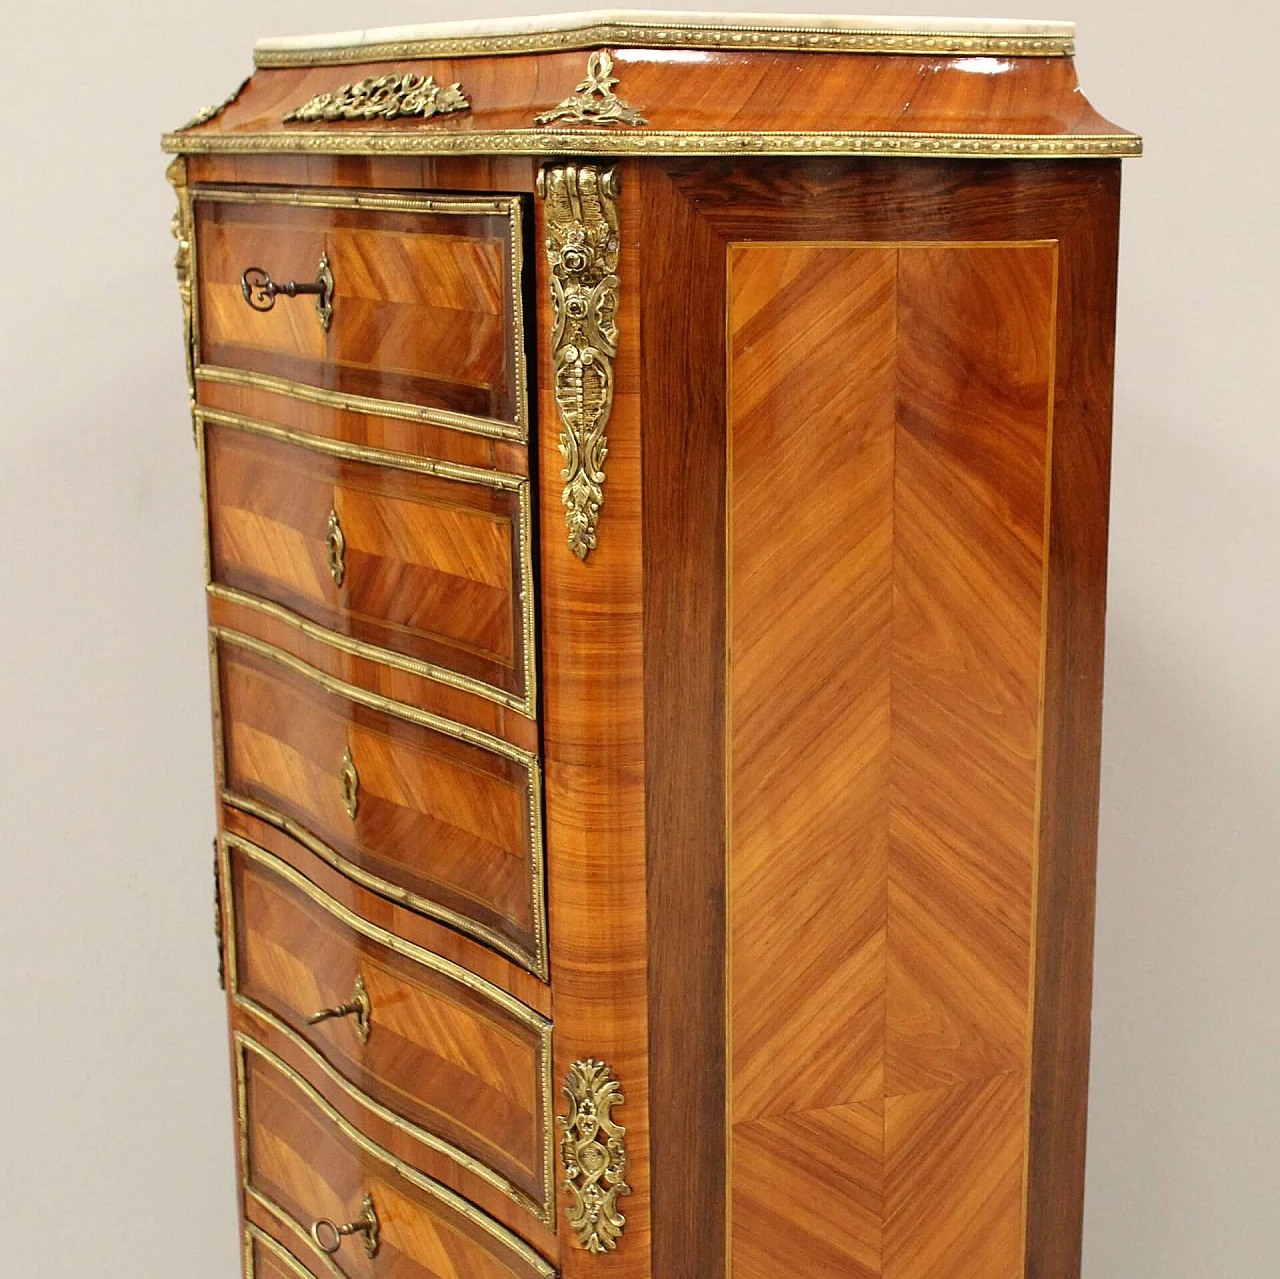 Napoleon III secretaire in bois de rose, rosewood inlay and gilded bronze with marble top, 19th century 8